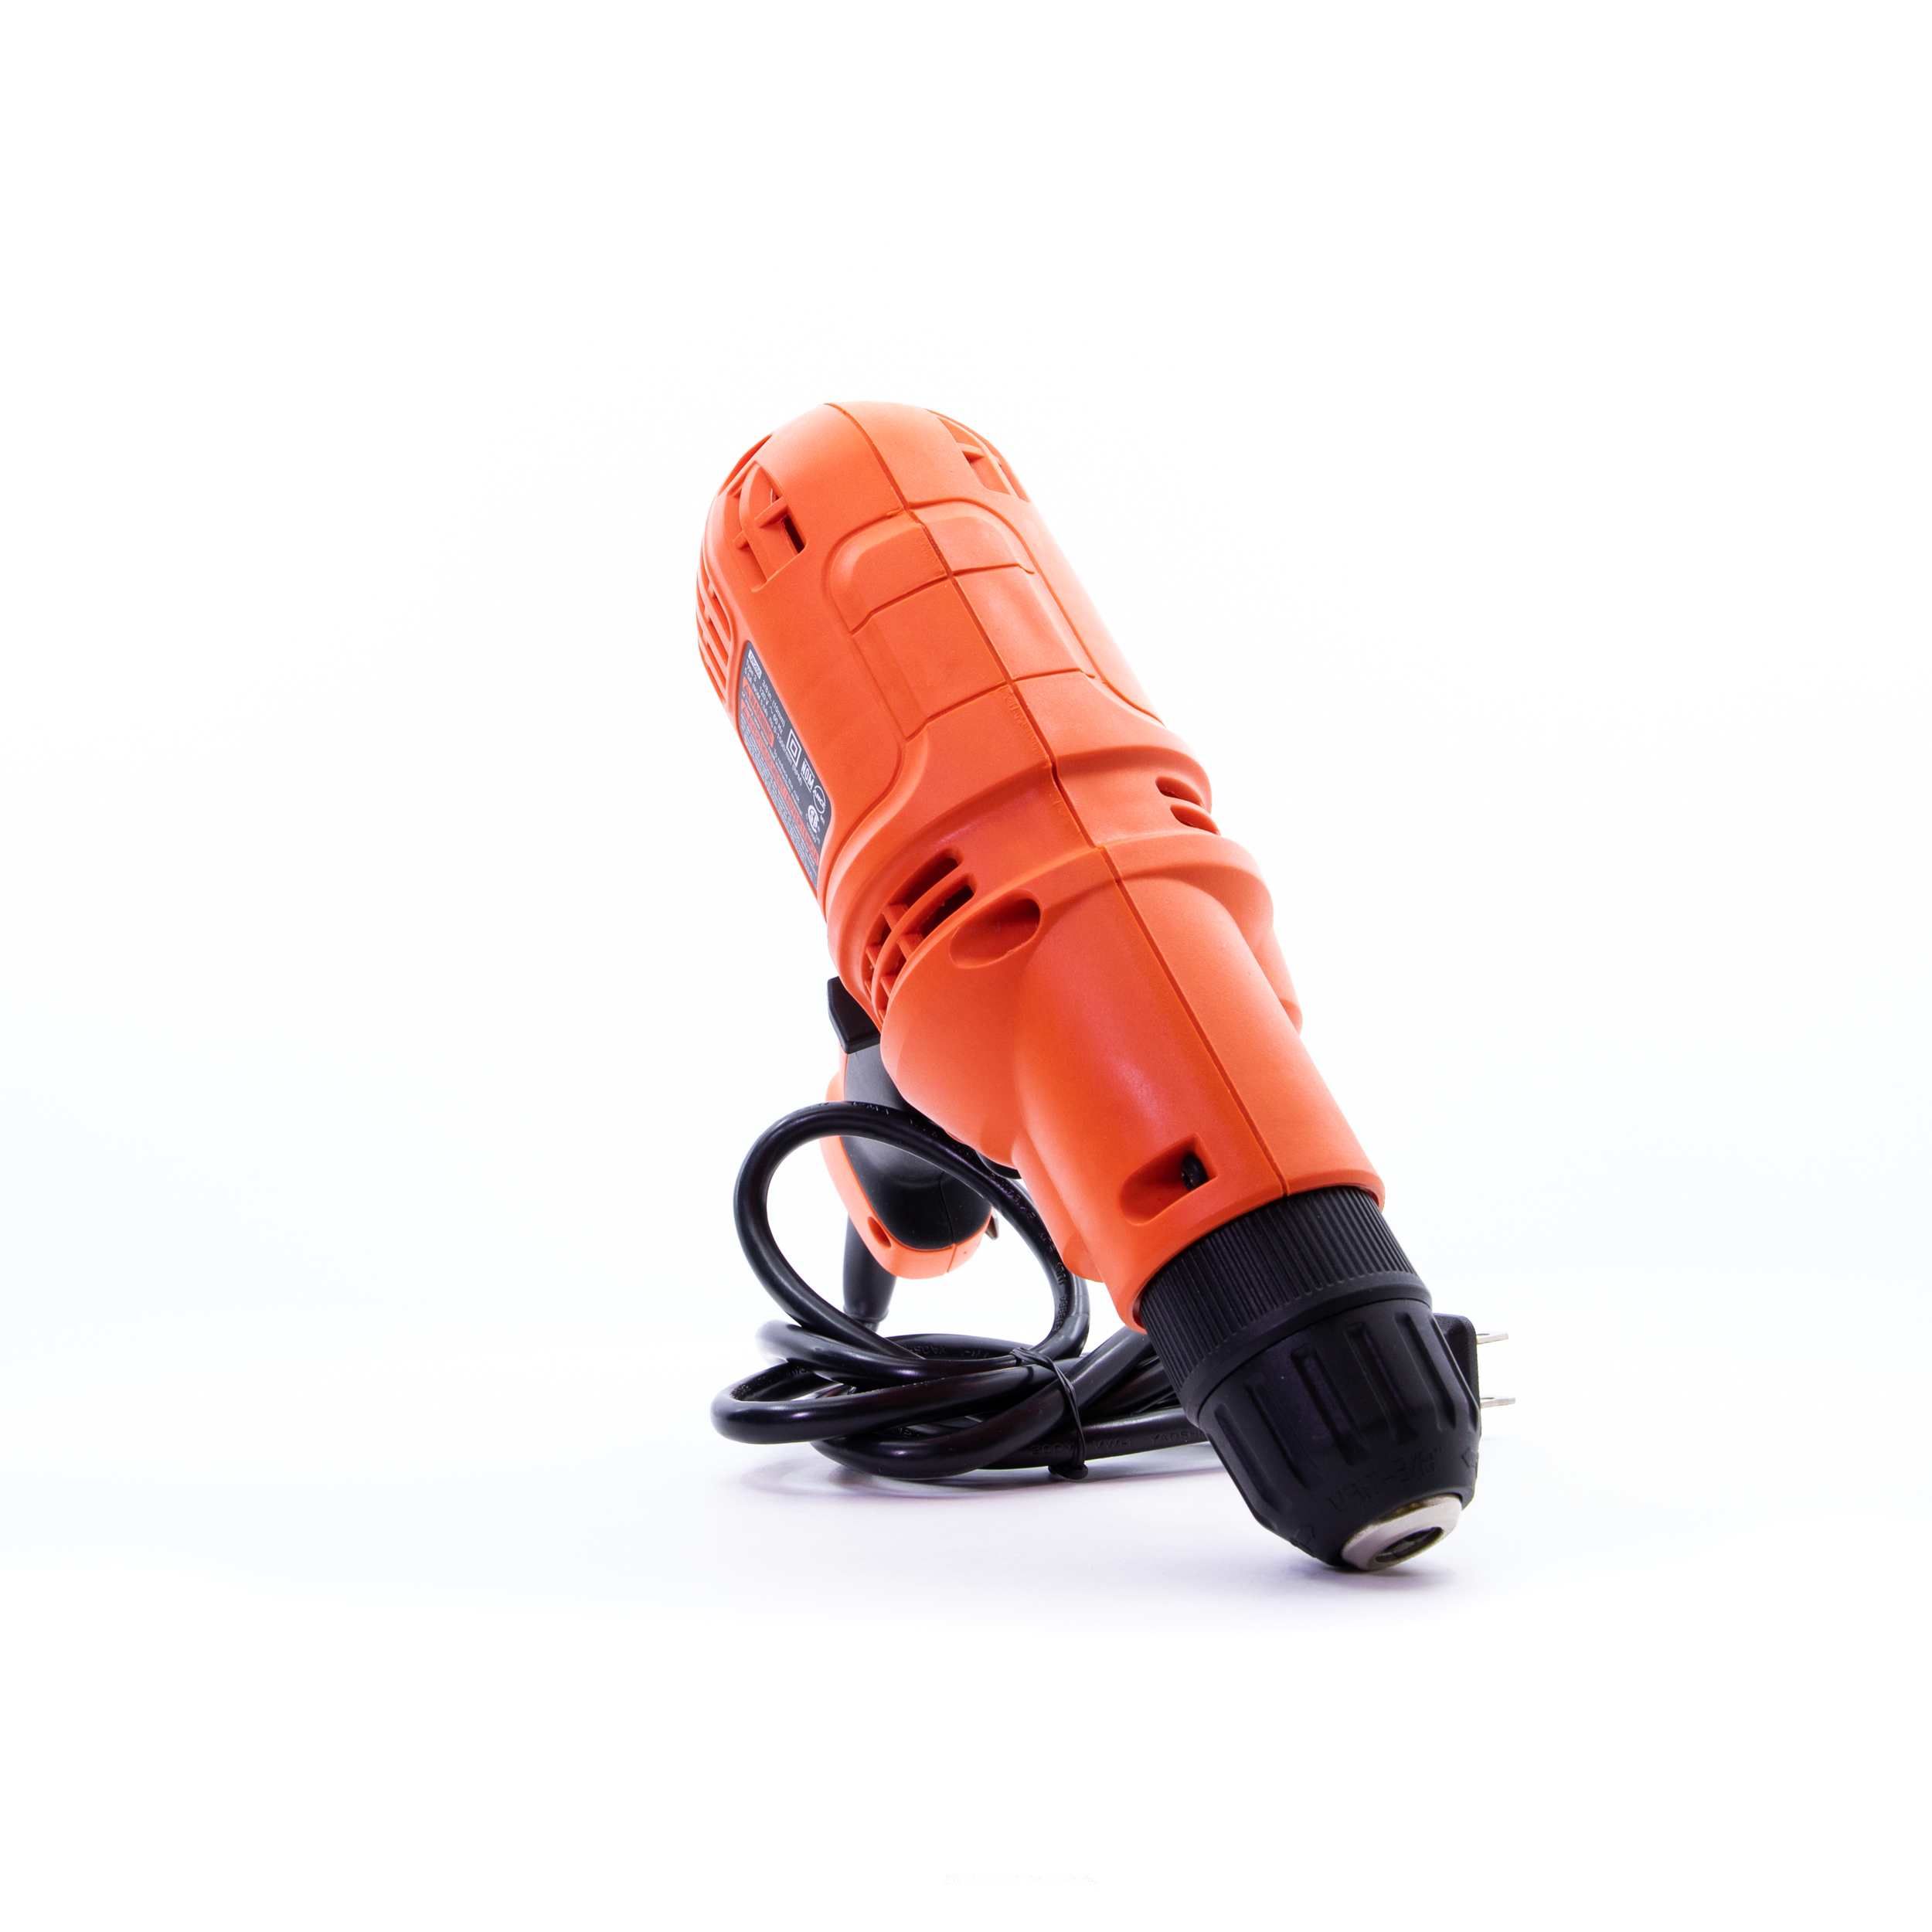 Black and Decker 5.5 AMP 3/8 Corded Drill Unboxing and Test